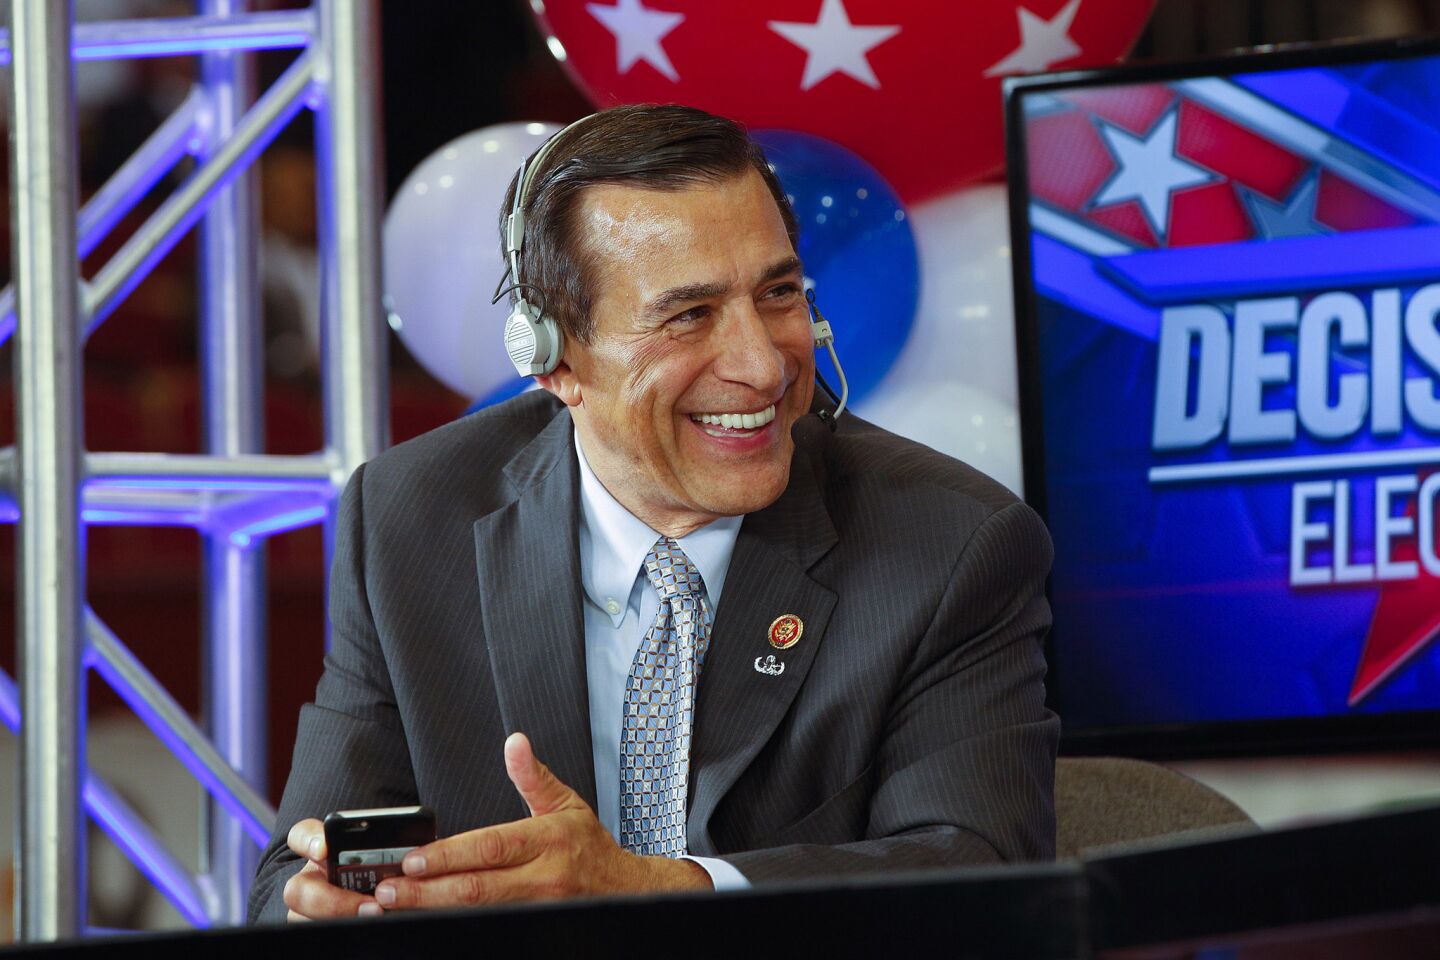 Incumbent Darrel Issa for the 49th Congressional District sits during a television interview at Golden Hall on election night. Issa won a ninth term by roughly 1,600 votes, a narrow 0.6 percent victory margin, after fending off an unexpectedly strong Democratic challenger in former Marine Col. Doug Applegate. Issa had gotten at least 58 percent of the vote in his eight previous campaigns. Applegate and others had made Issa's support of Trump a central issue.